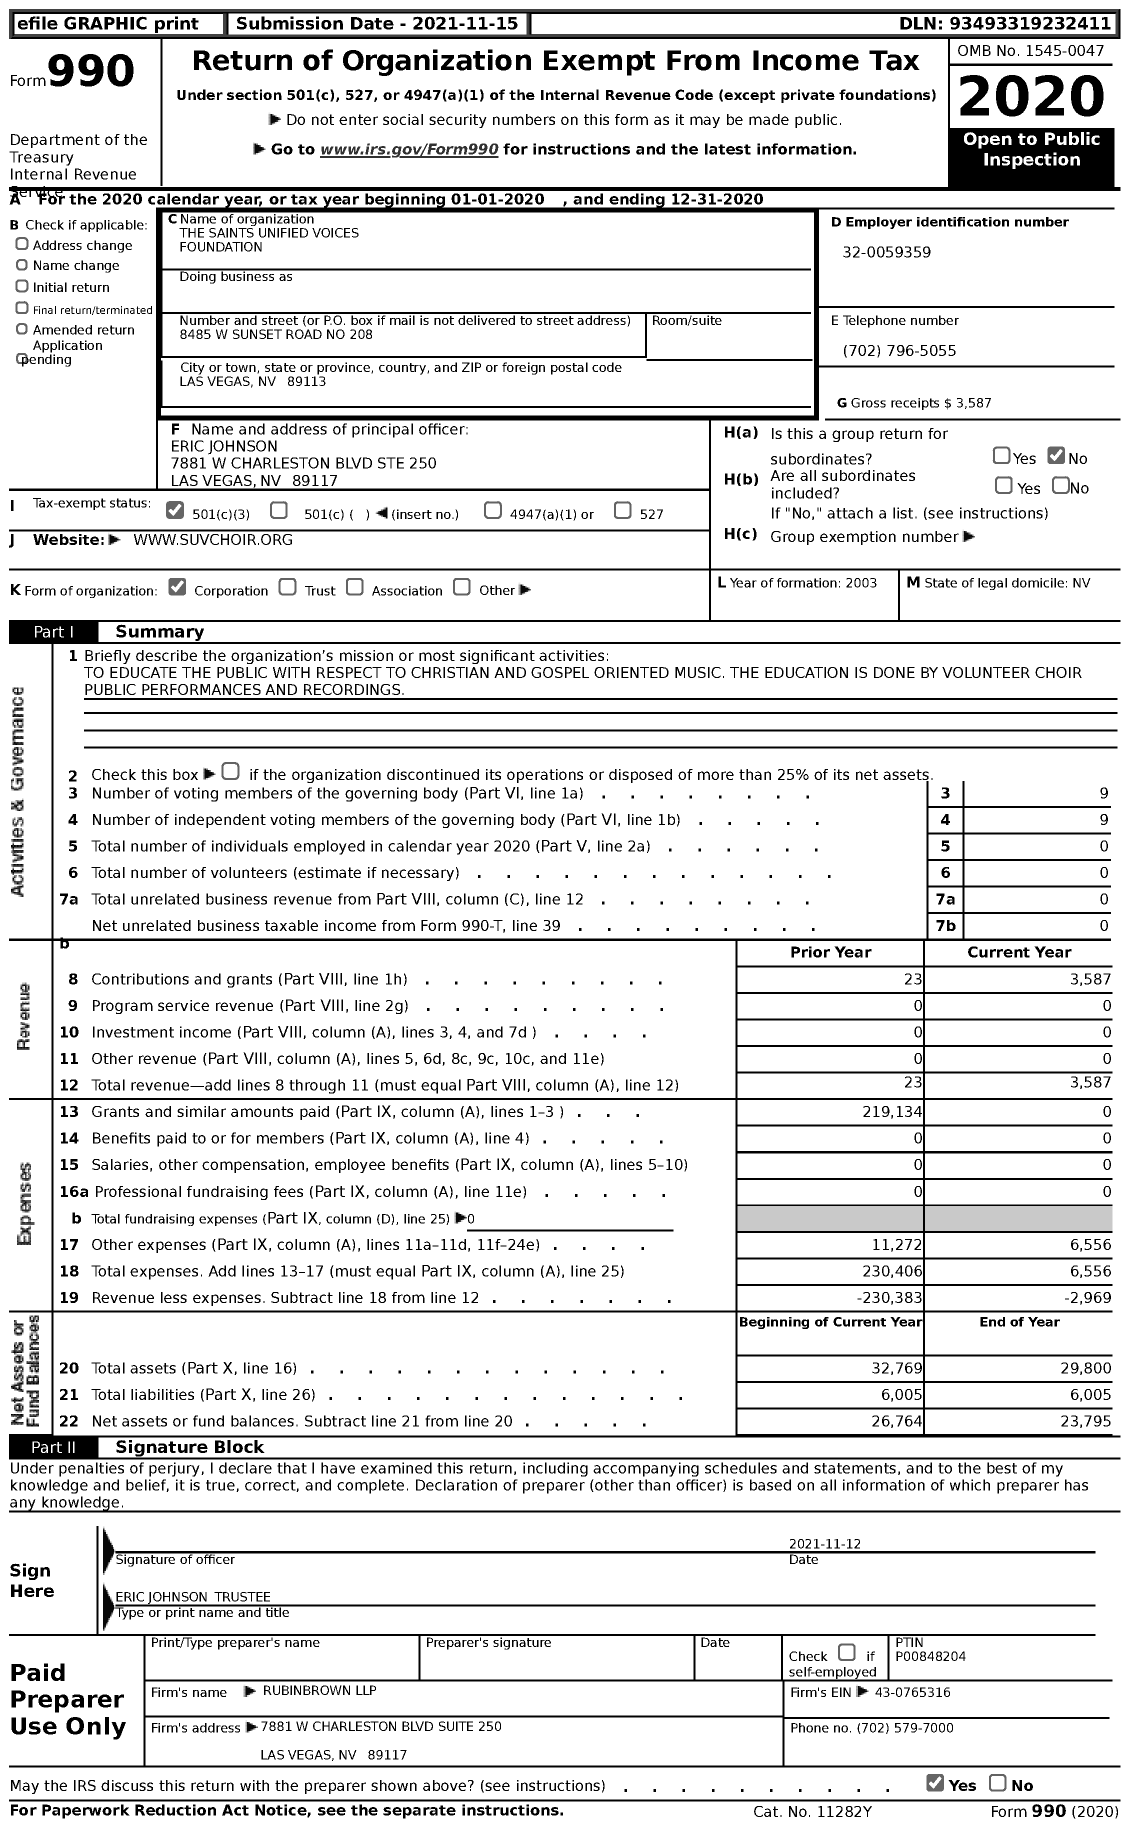 Image of first page of 2020 Form 990 for The Saints Unified Voices Foundation